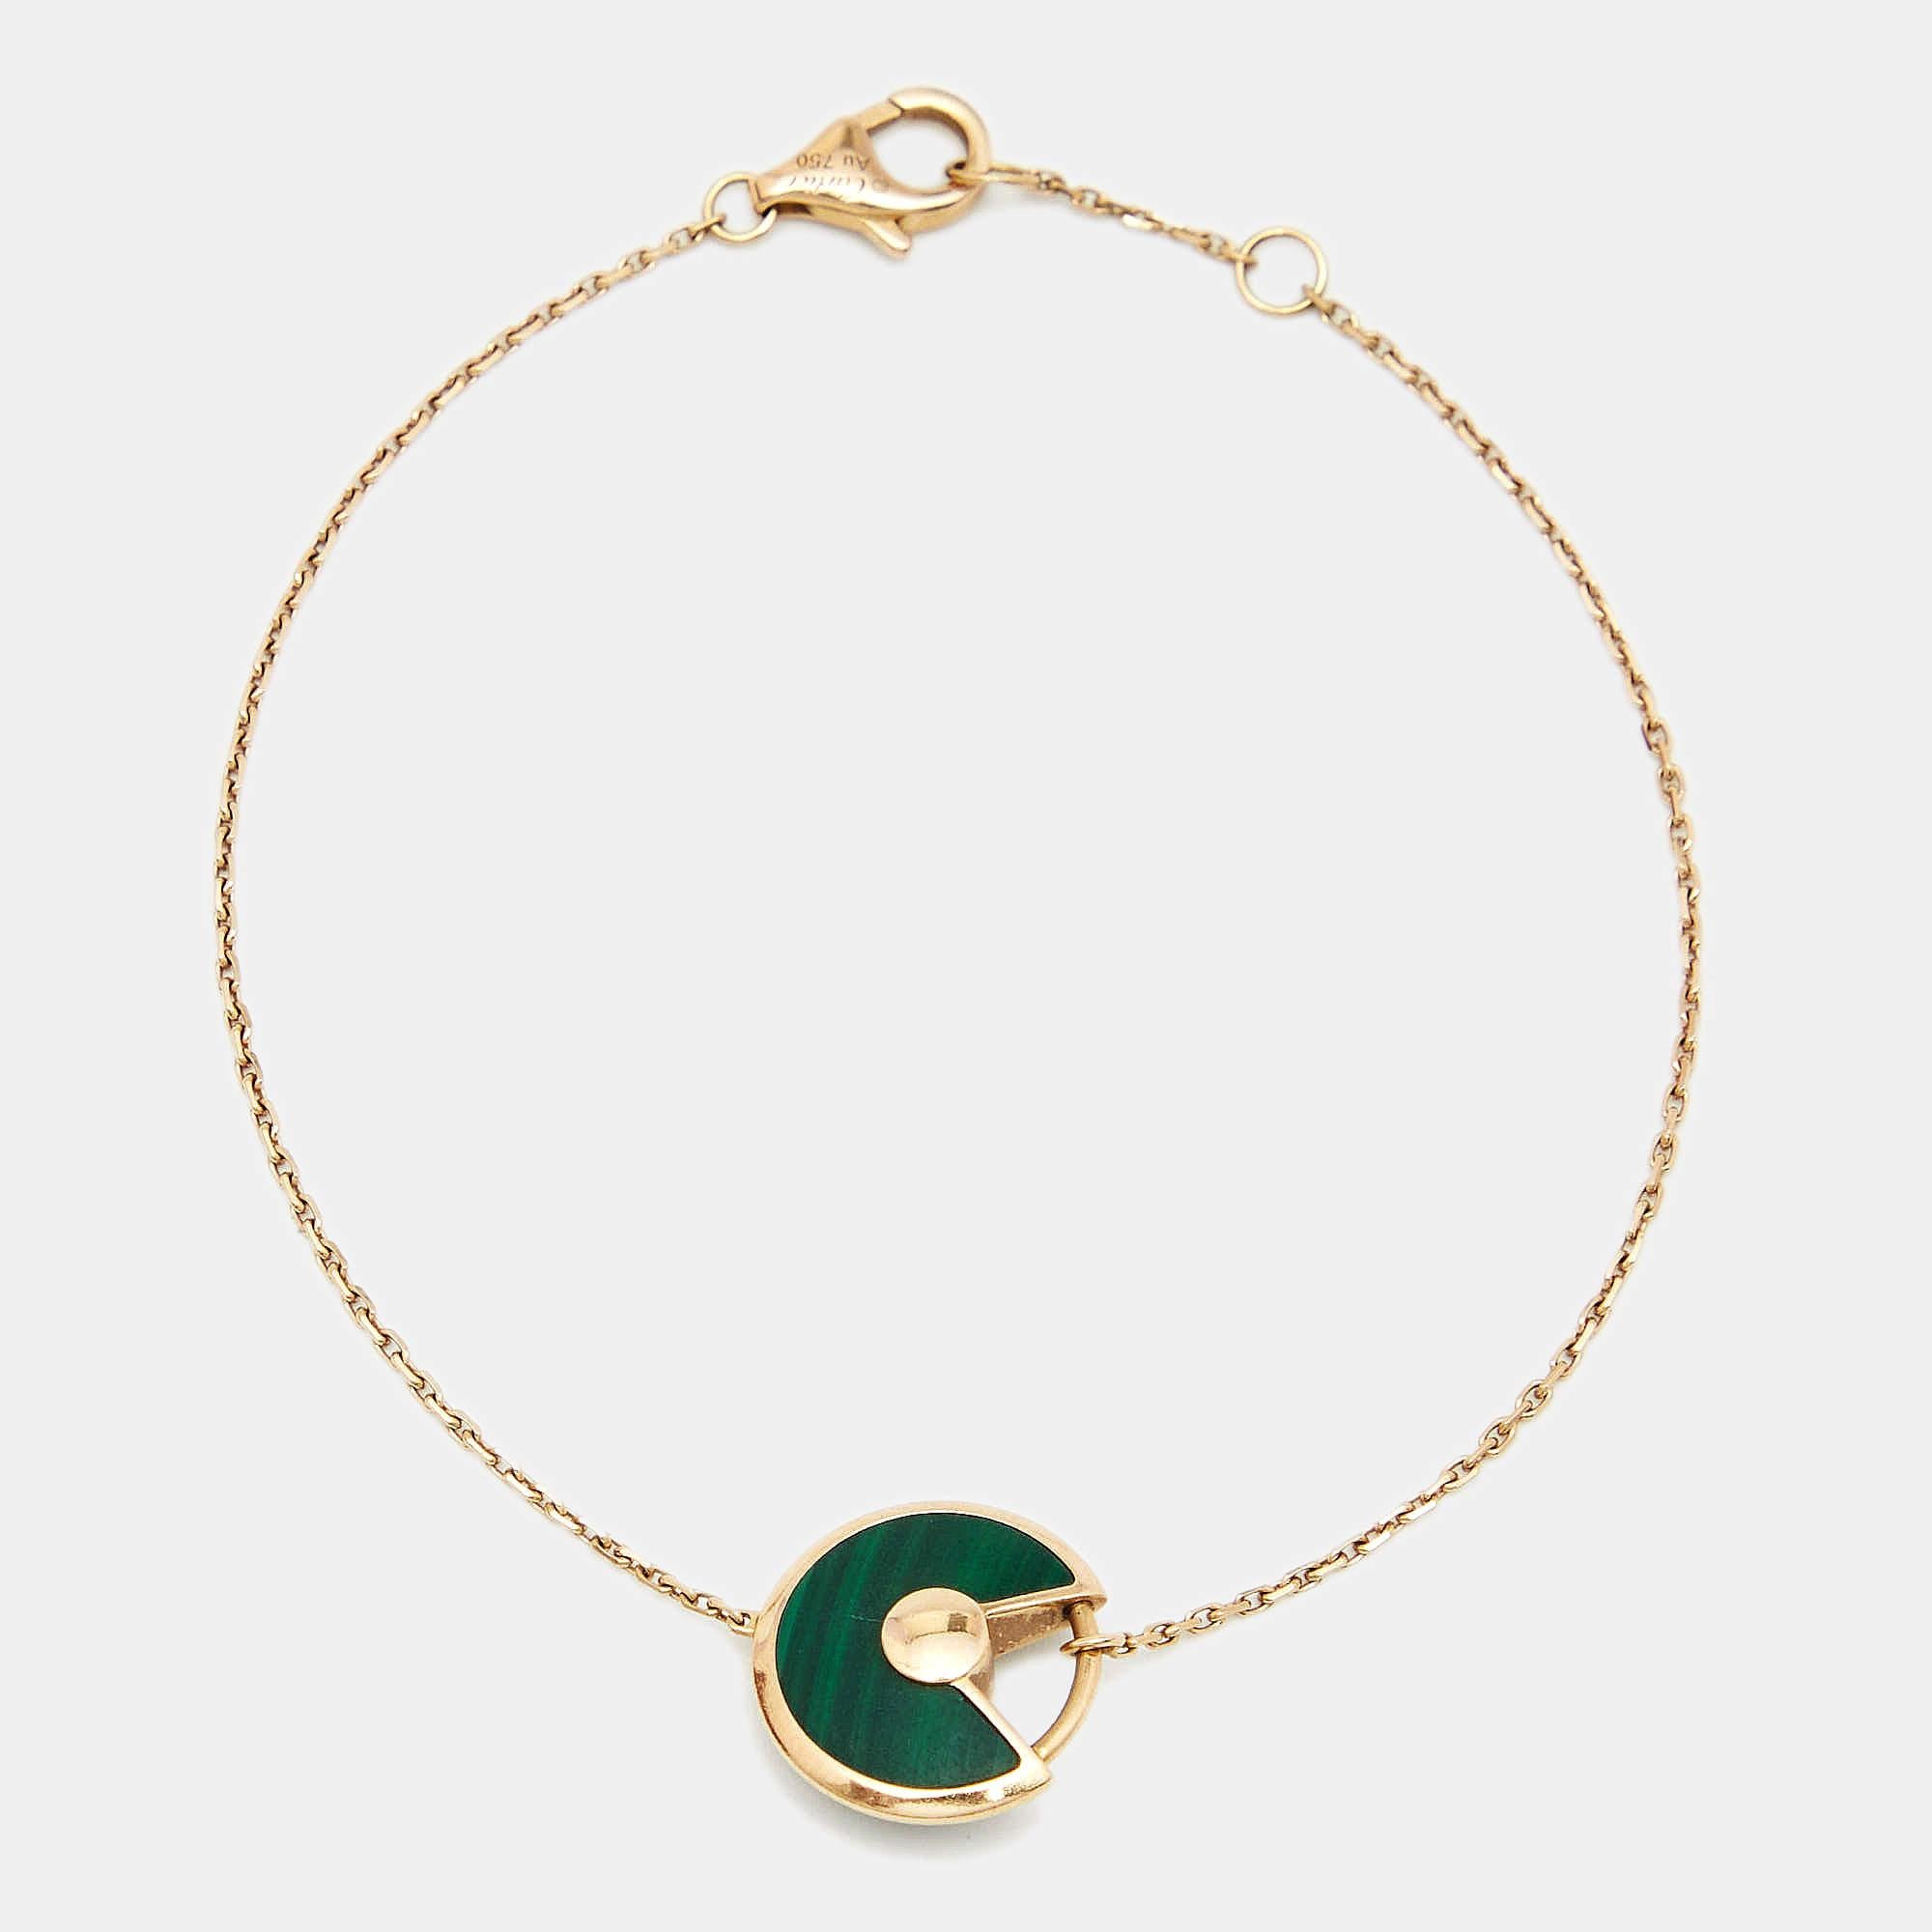 A minimal yet magnificent offering from Cartier's Amulette de Cartier line. The bracelet comes sculpted in 18k rose gold and it has the signature motif in malachite highlighted by a shimmering diamond. Smoothly finished, the desirable creation